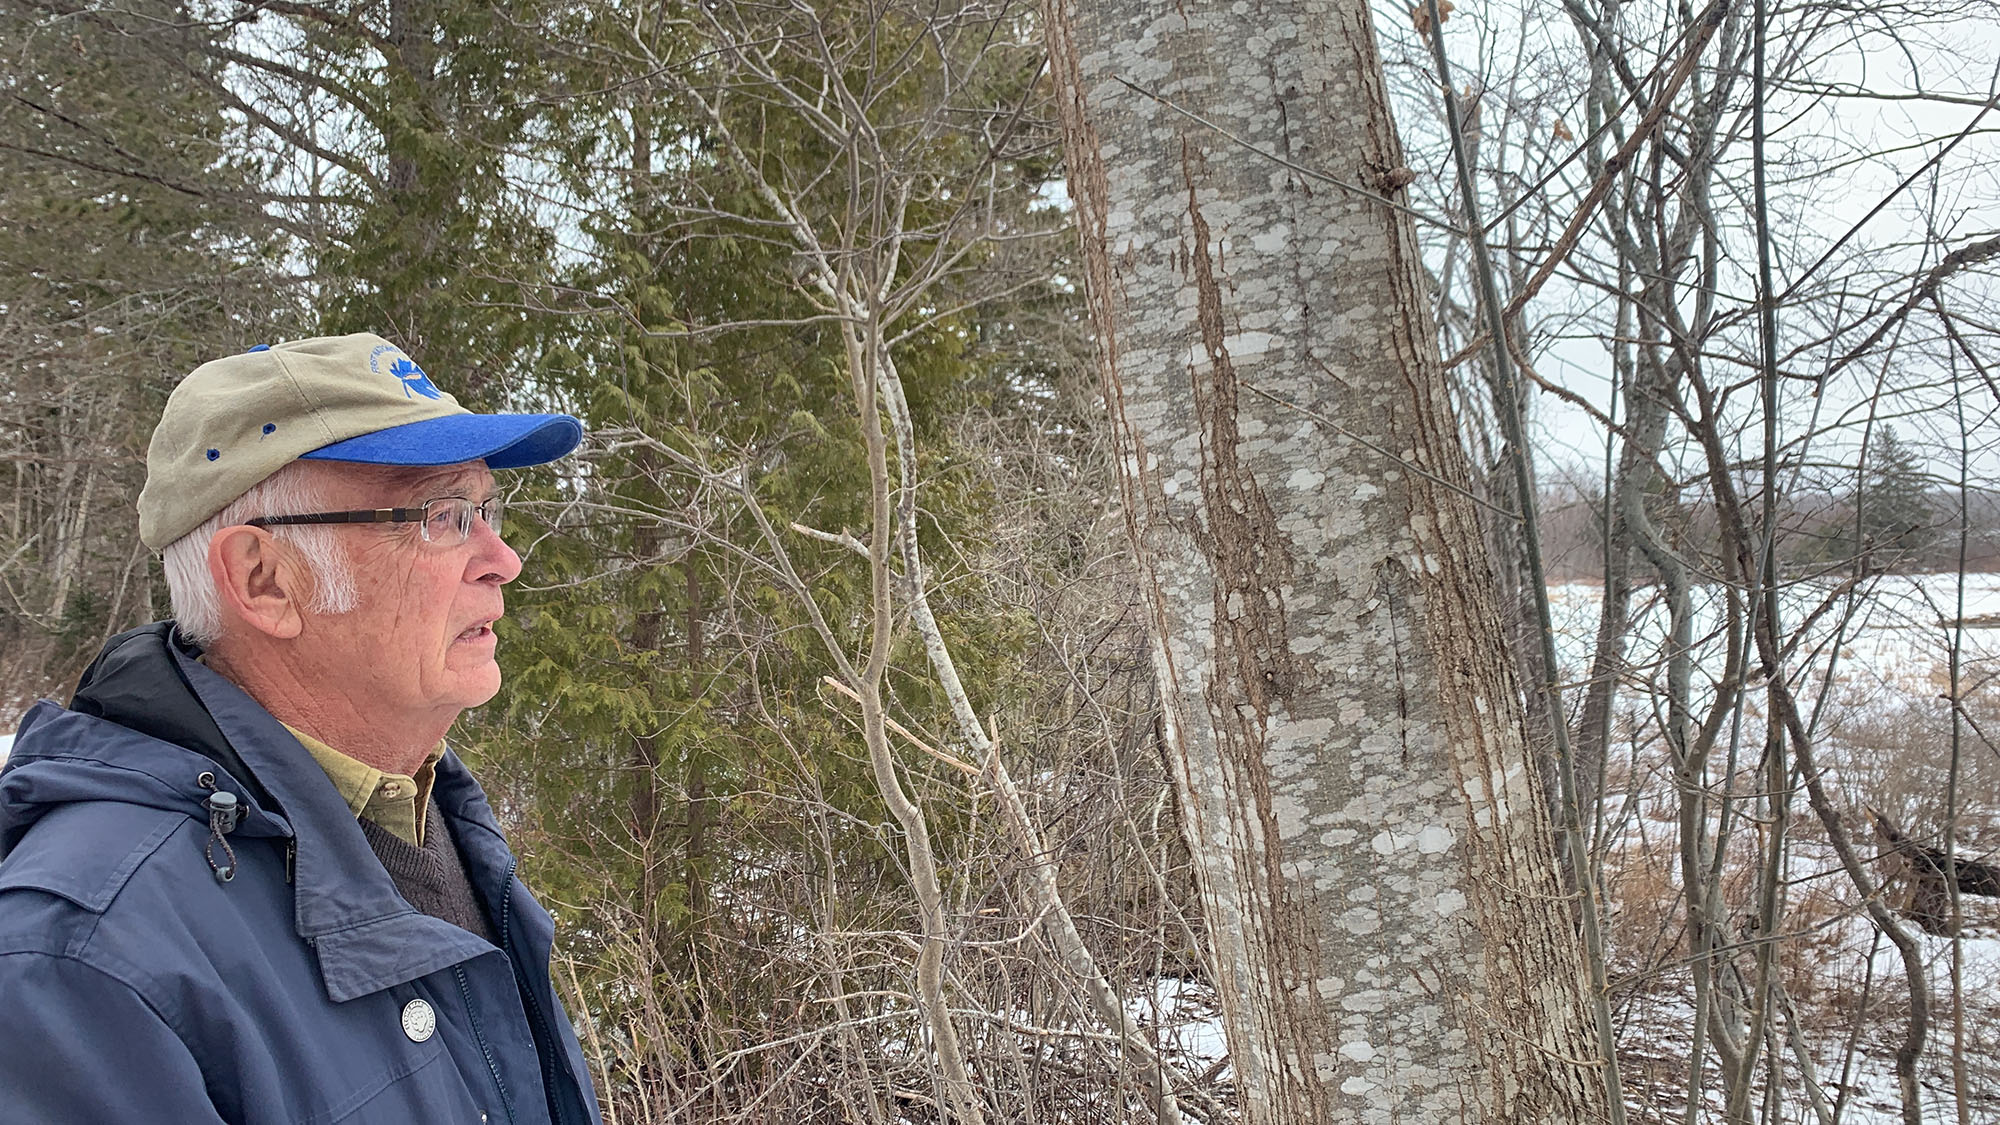 Former provincial biologist turned activist Bob Bancroft explains what kind of environment the mainland moose need to survive in Nova Scotia.